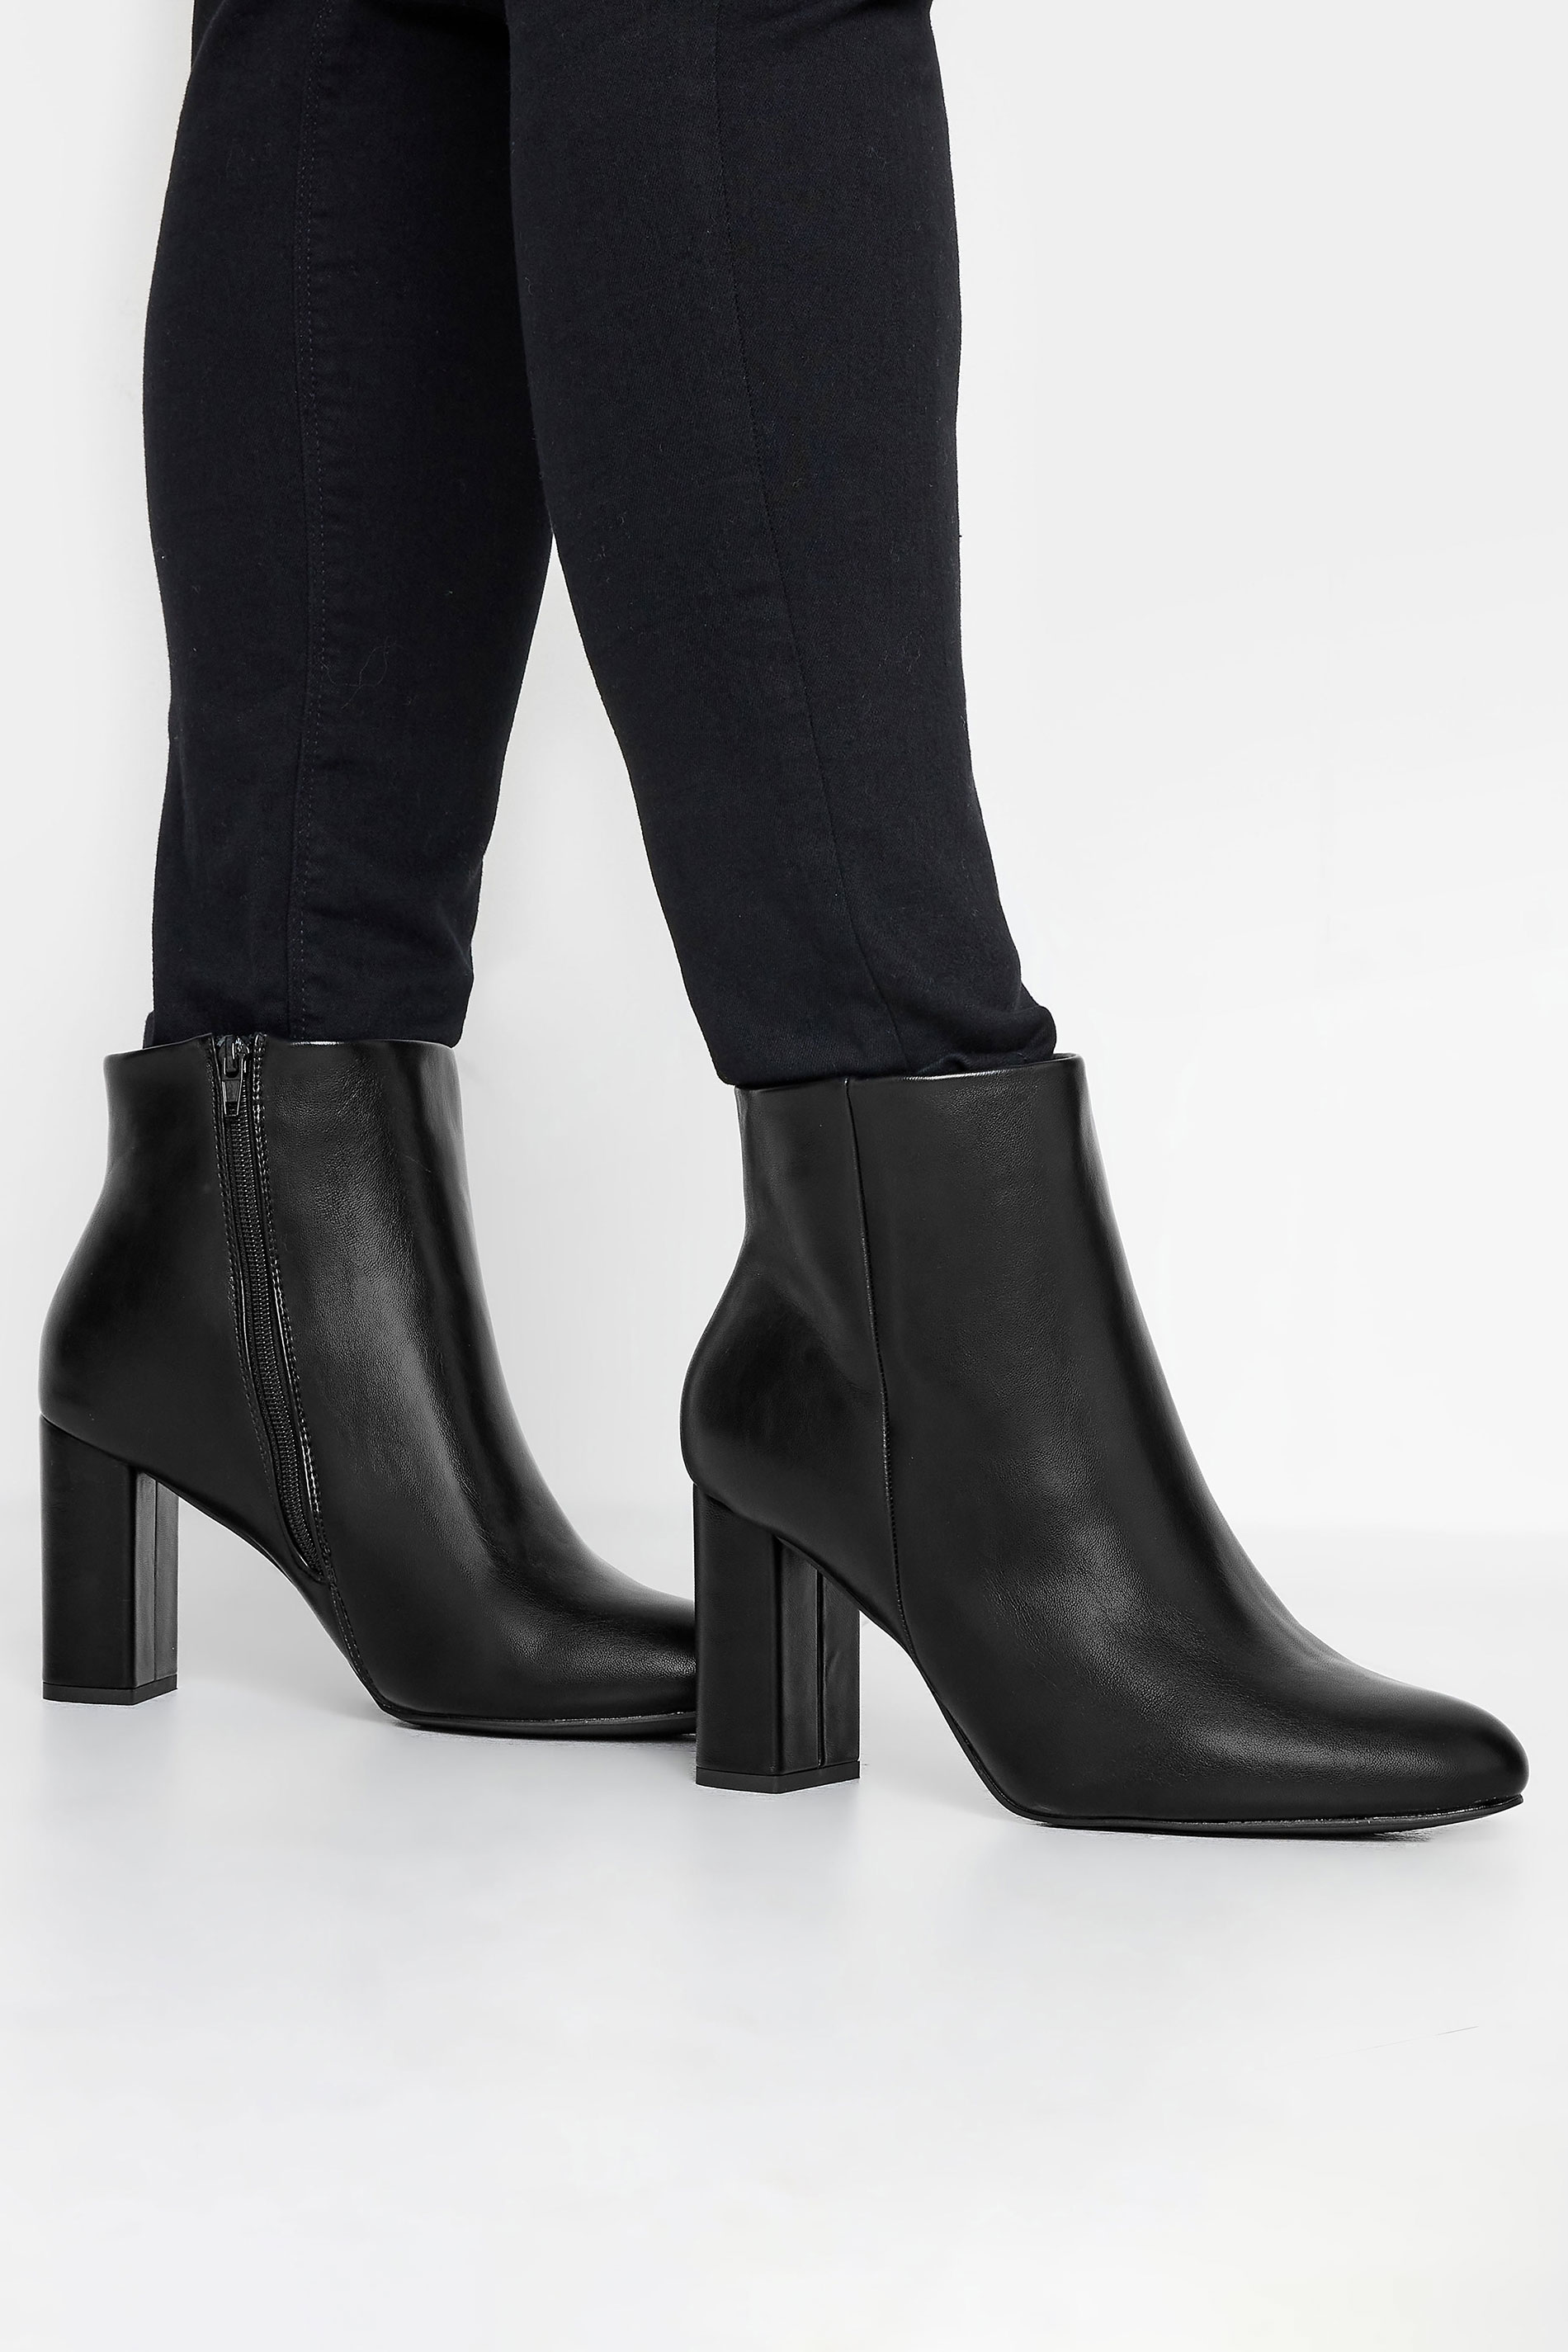 LIMITED COLLECTION Black Heeled Ankle Boots In Extra Wide EEE Fit | Yours Clothing  1